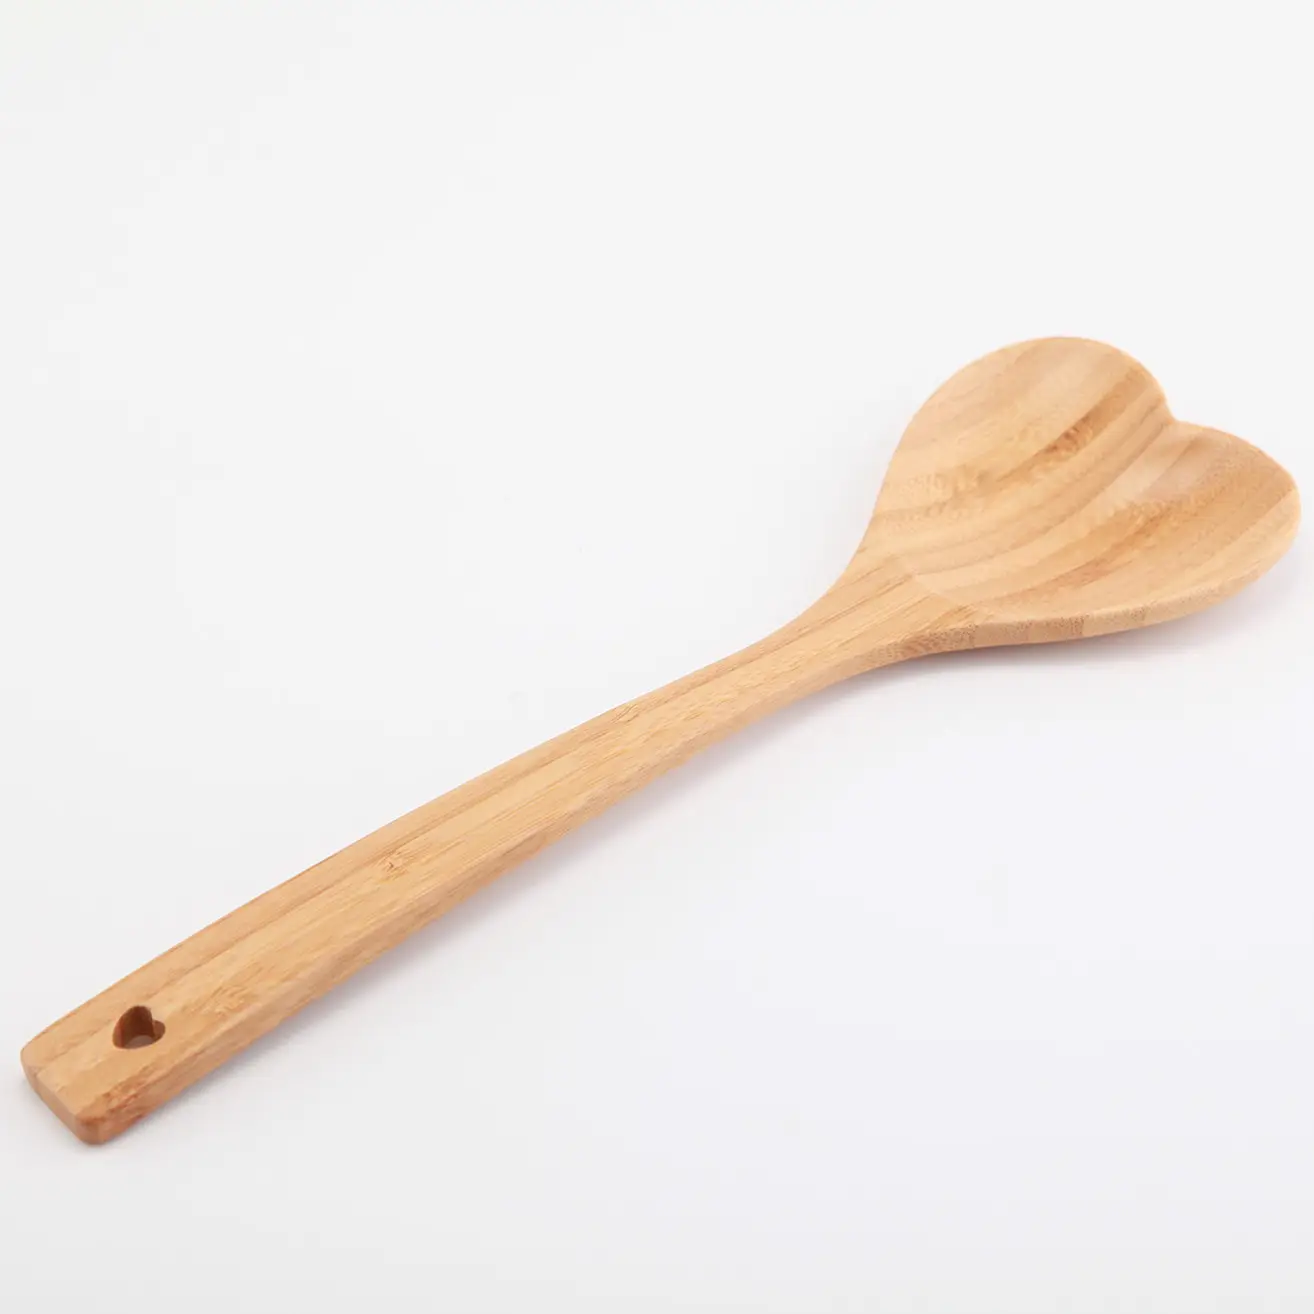 Bamboo Heart Shaped Wooden Spoon Wooden Serving Mixing Spoon Kitchen Utensil